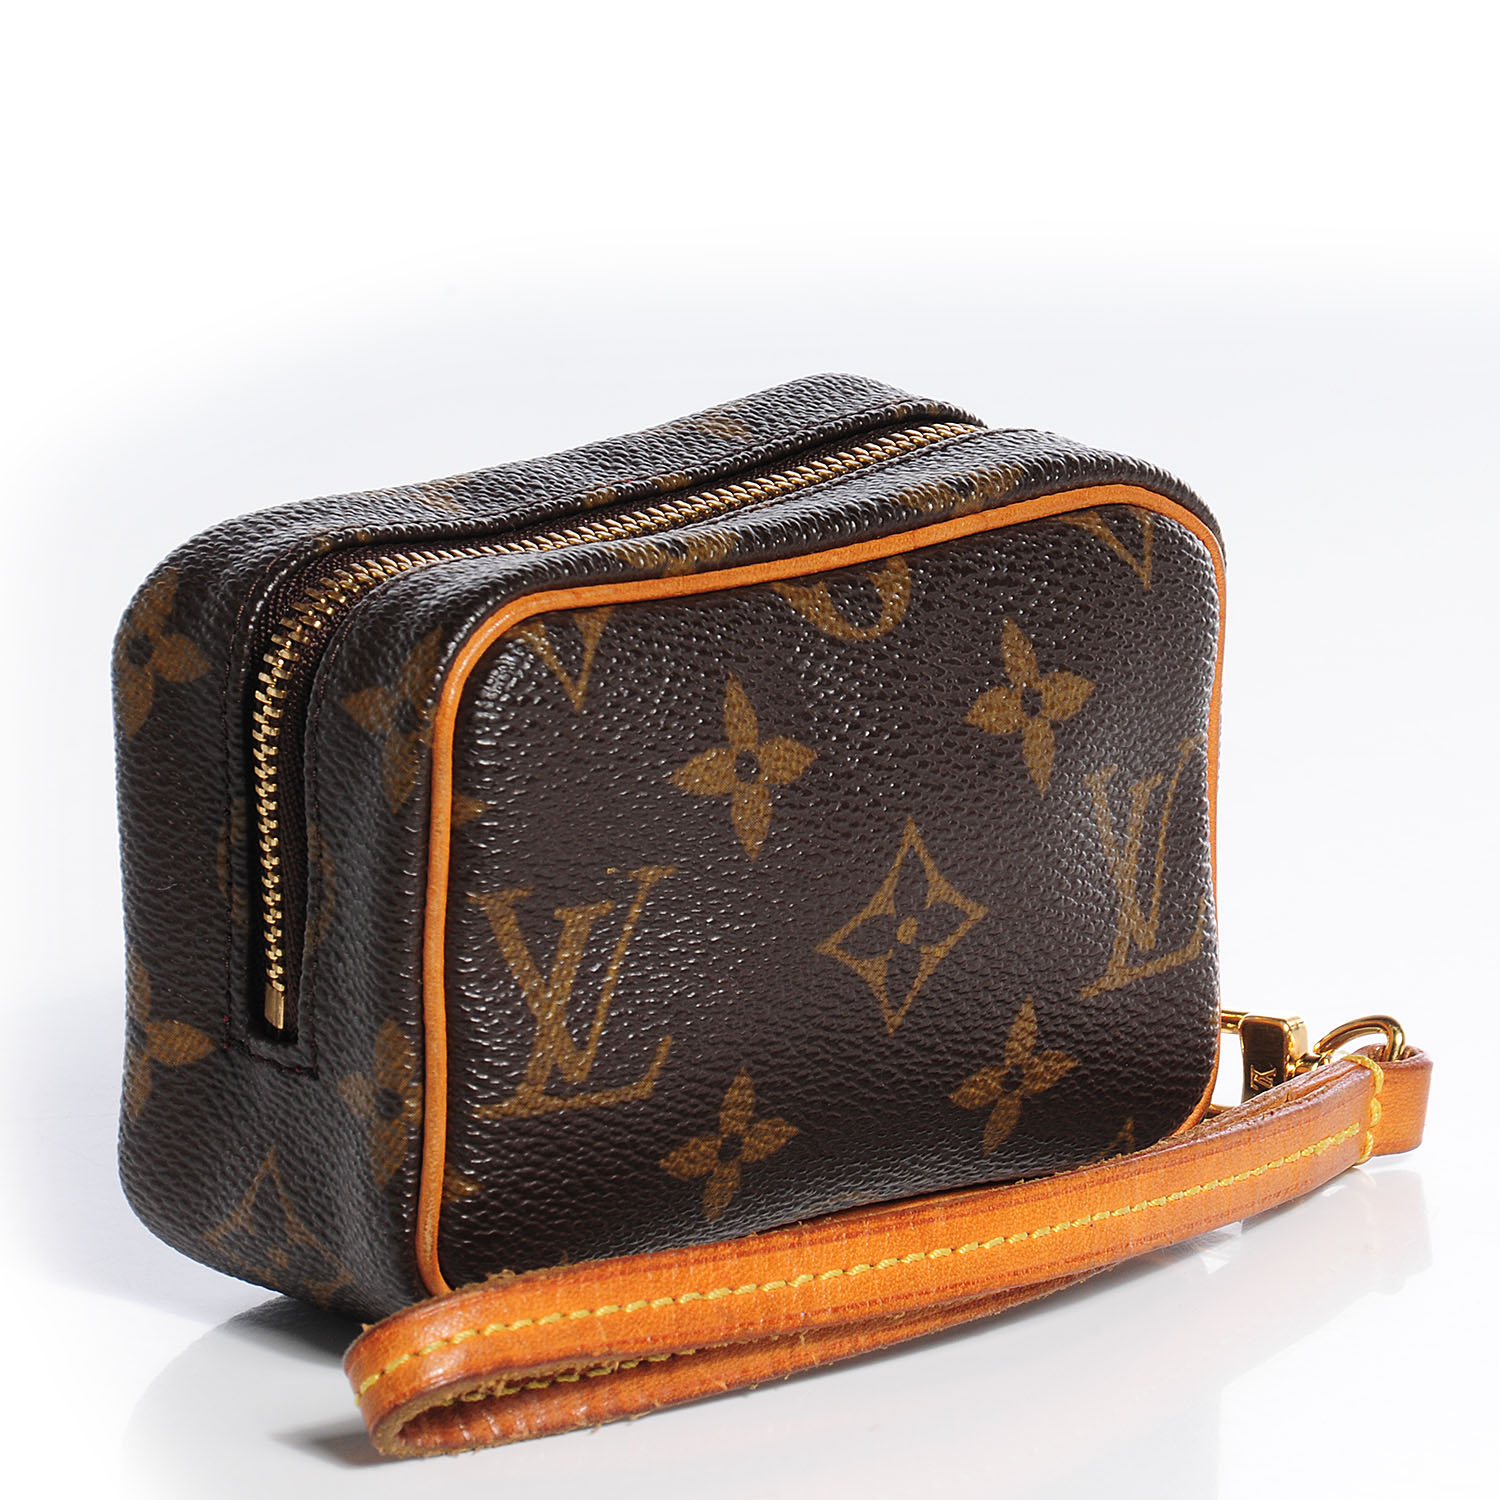 Louis Vuitton Leather Cases, Covers & Skins